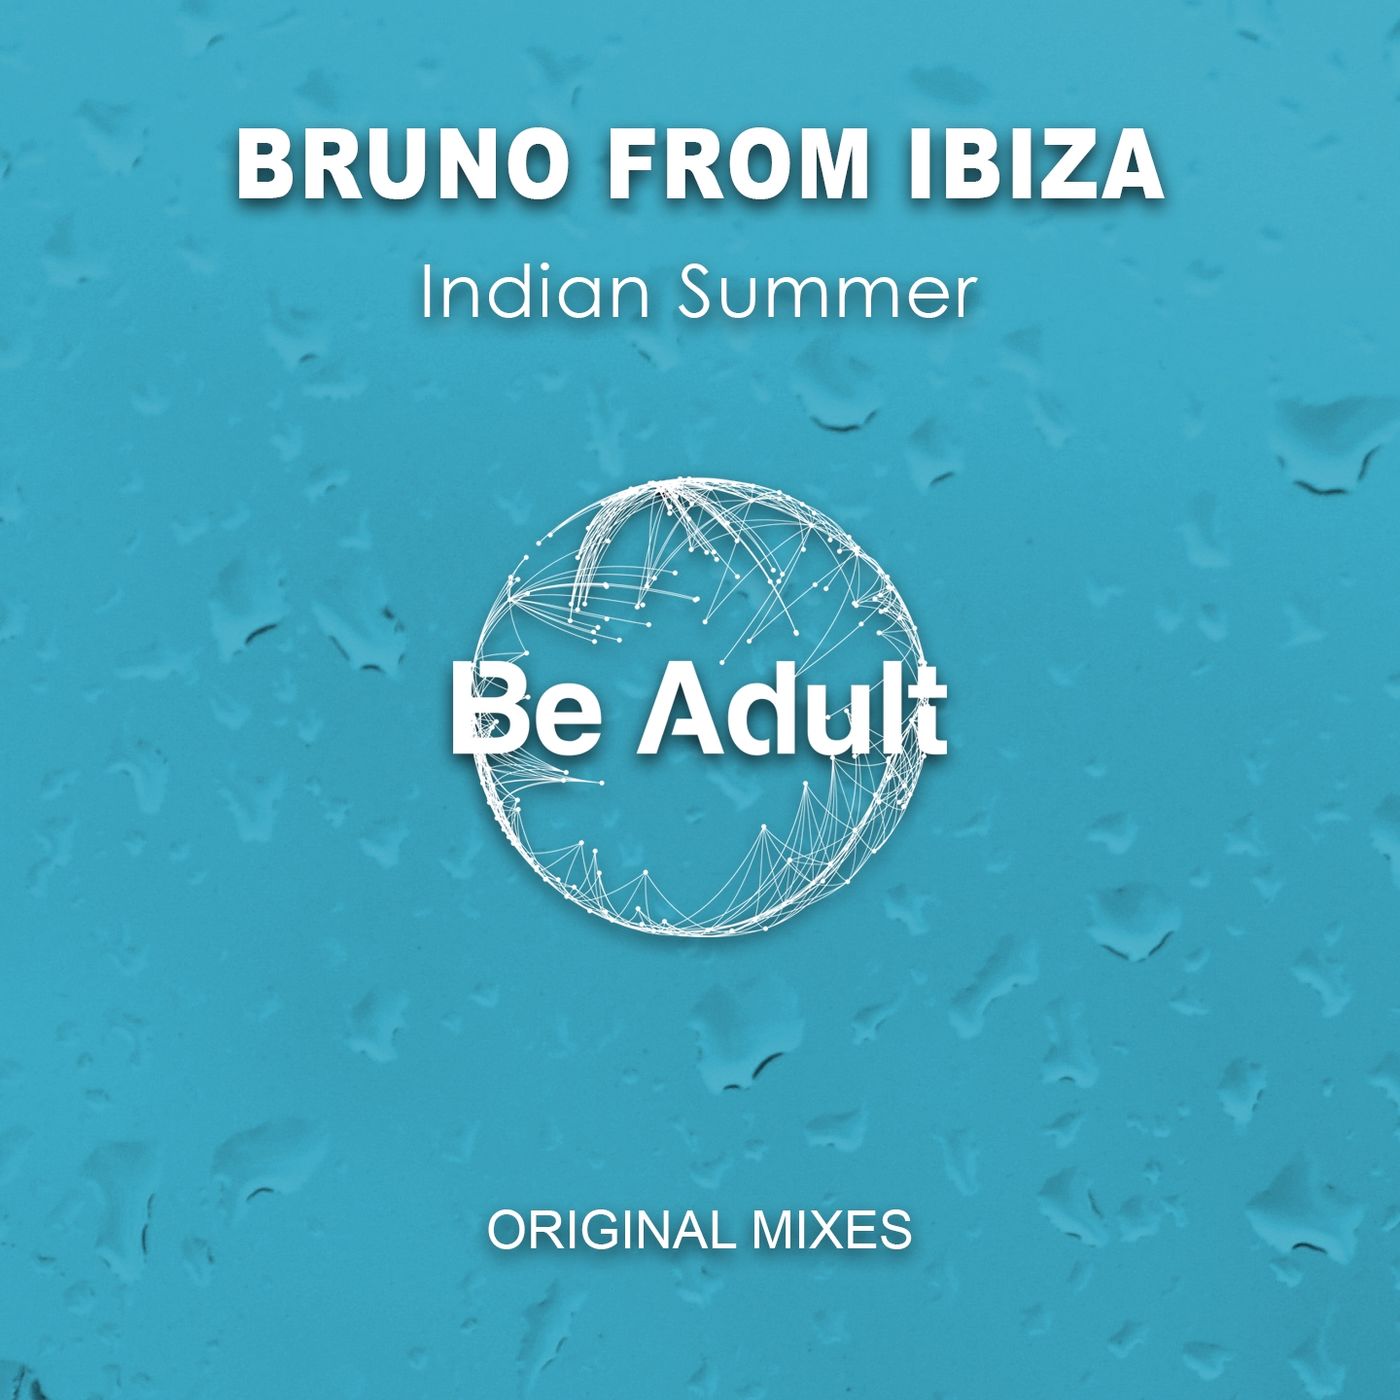 Bruno from Ibiza - Indian Summer / Be Adult Music